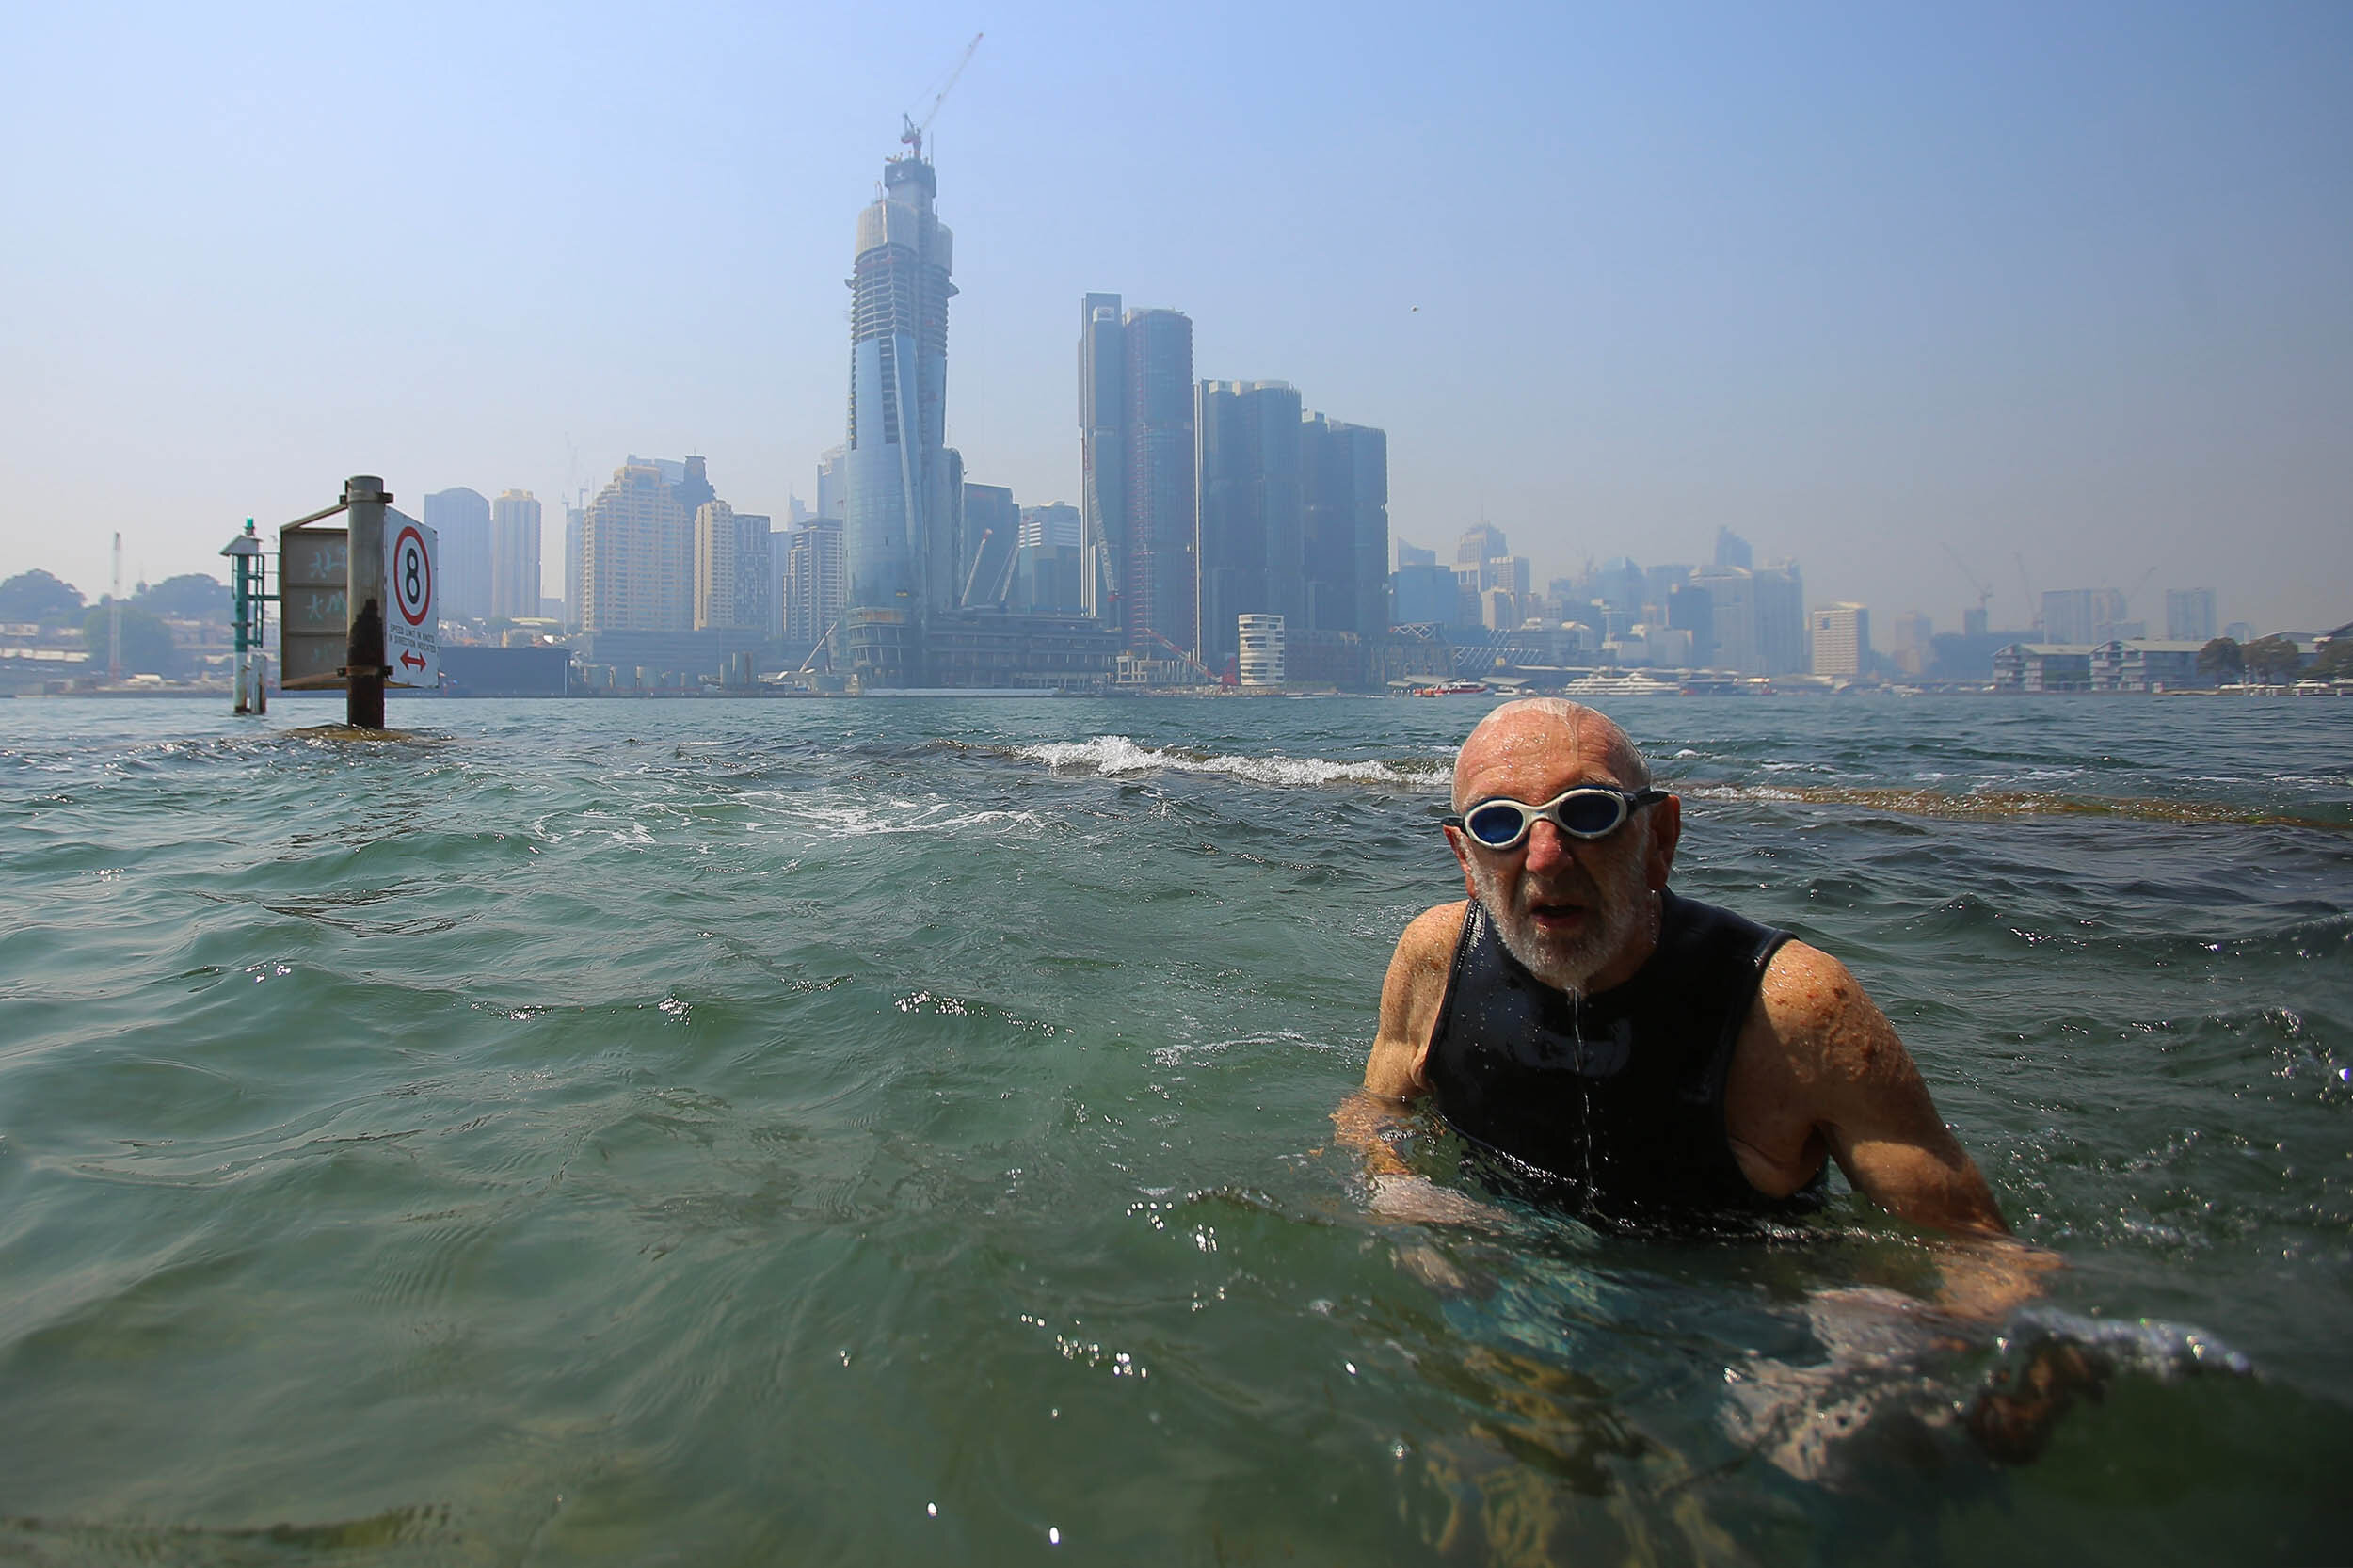  Frank Heatherton of Balmain swims in Sydney Harbour as smoke haze drifts over the CBD in Sydney, Thursday, October 31, 2019. Air quality readings in parts of NSW has reached hazardous levels as extensive smoke haze from fires in the state's north is